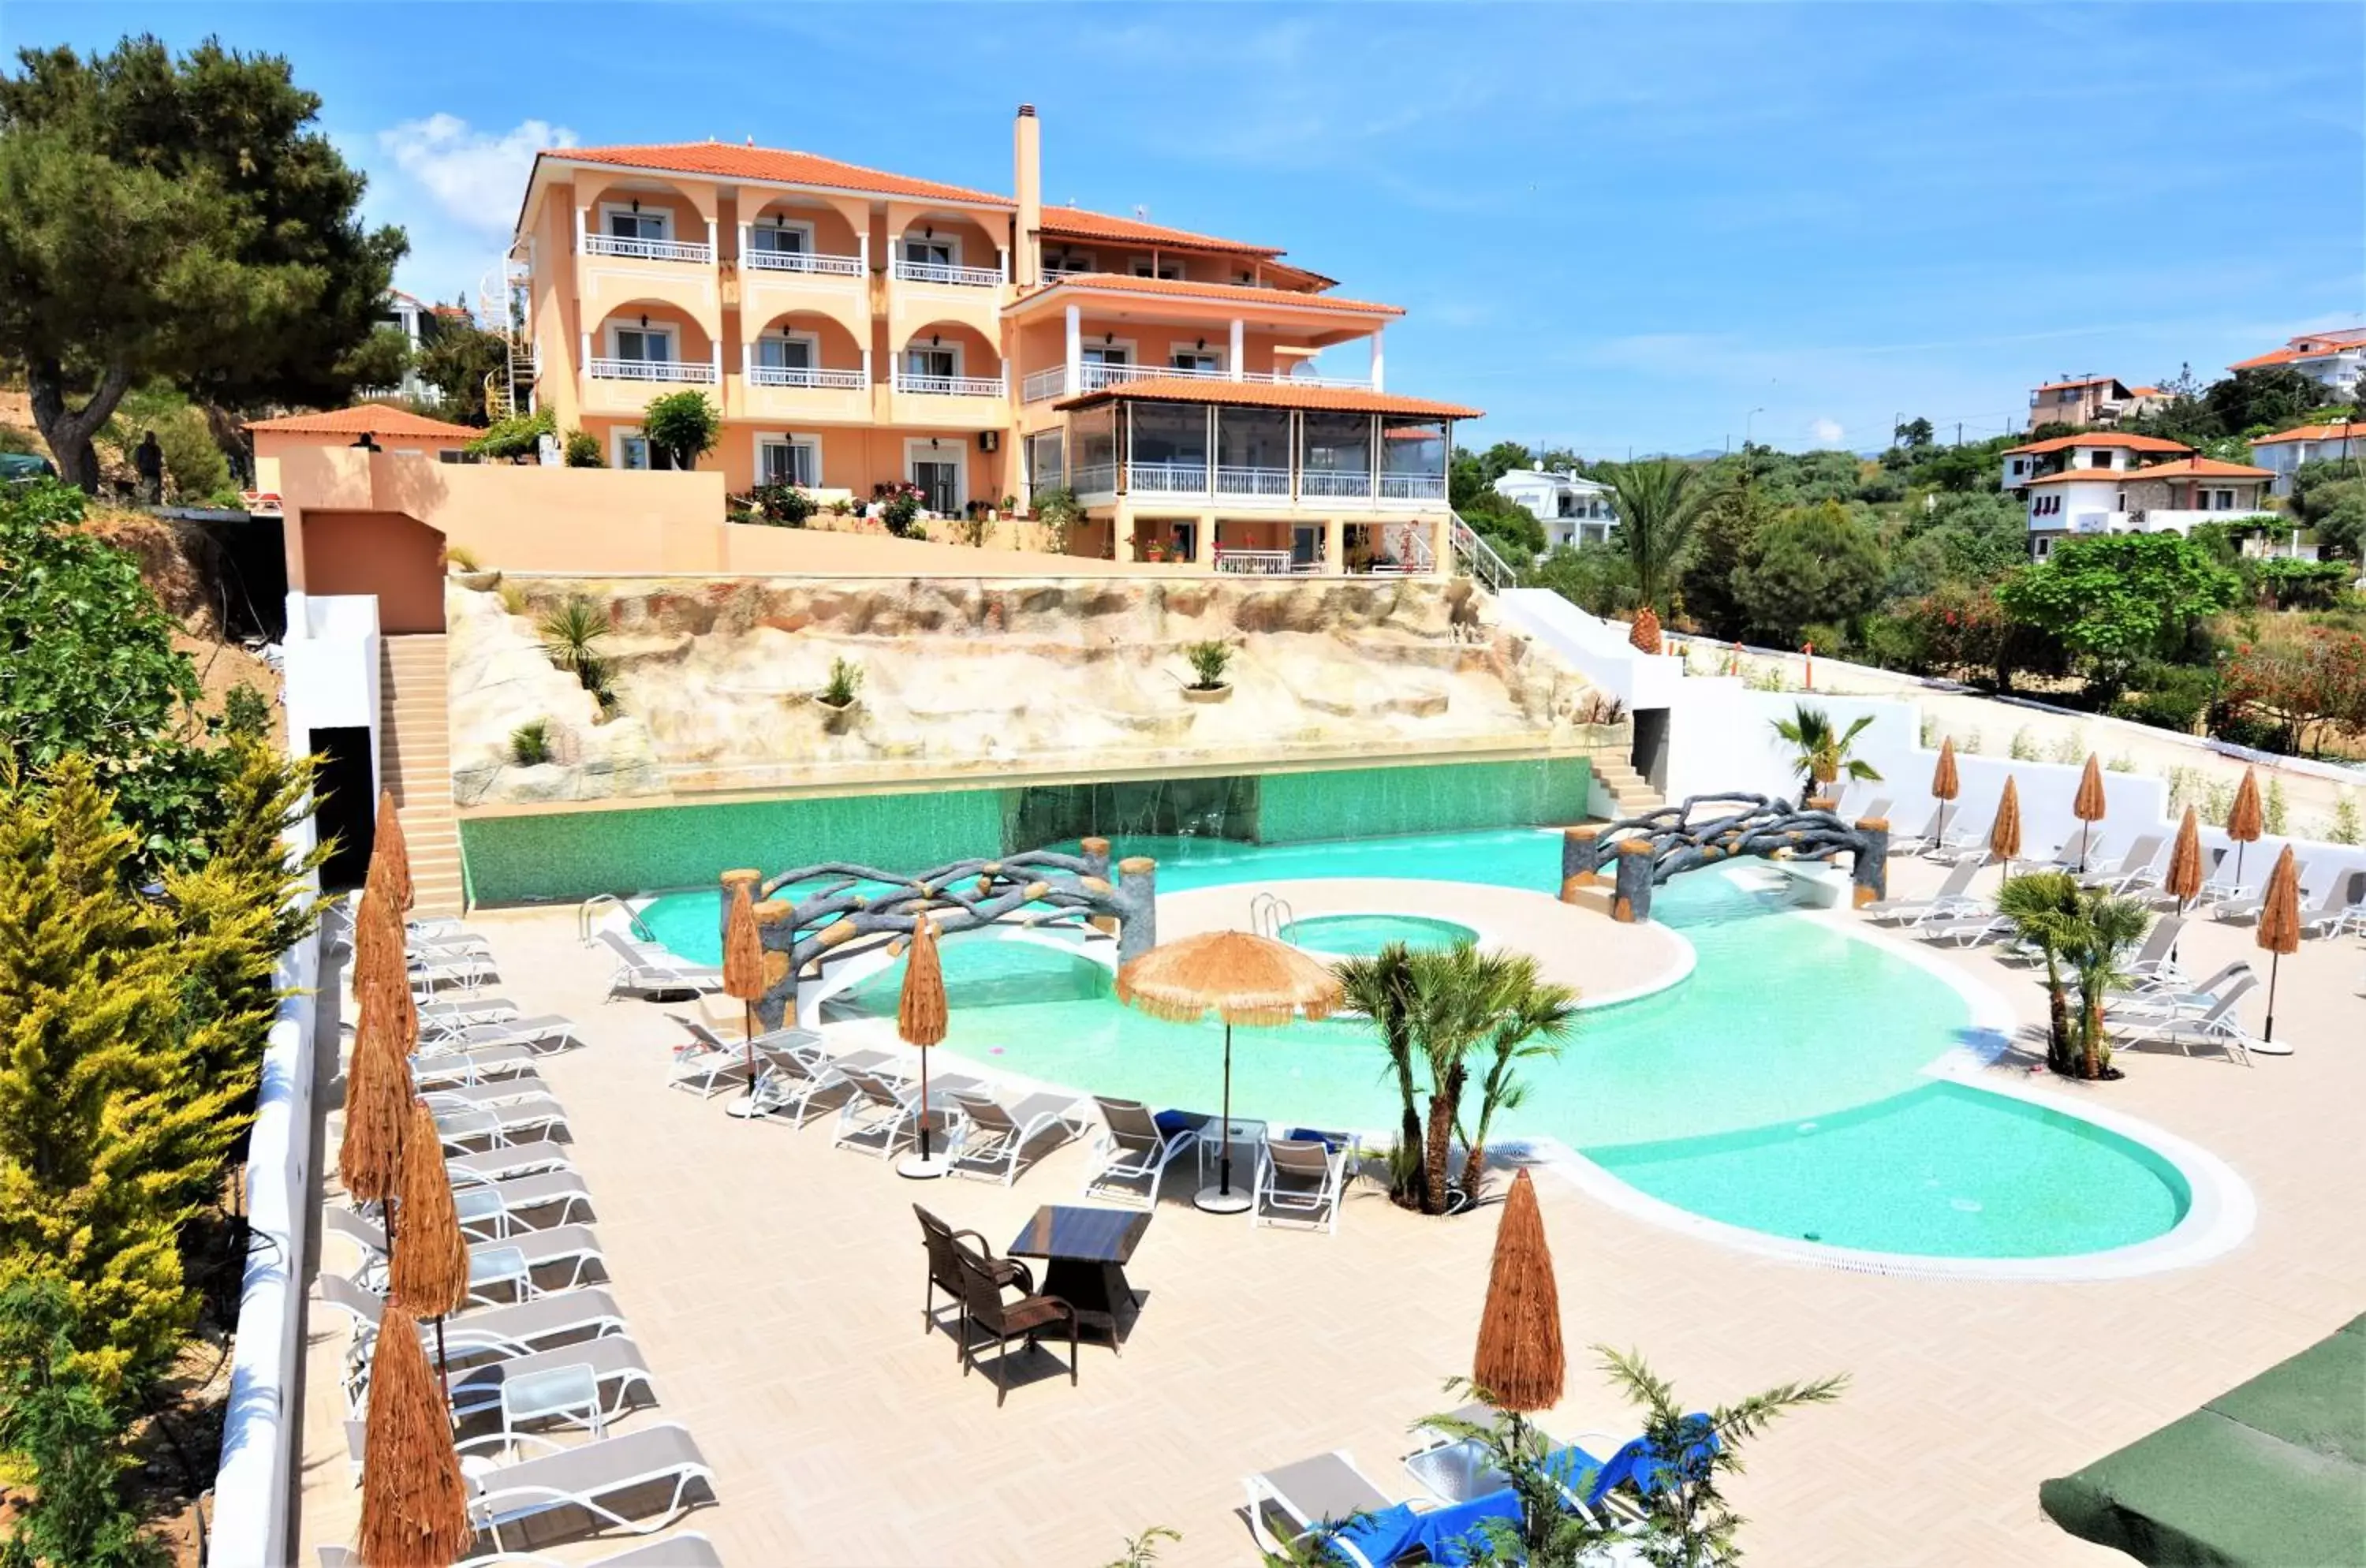 Property building, Pool View in Thassos Hotel Grand Beach